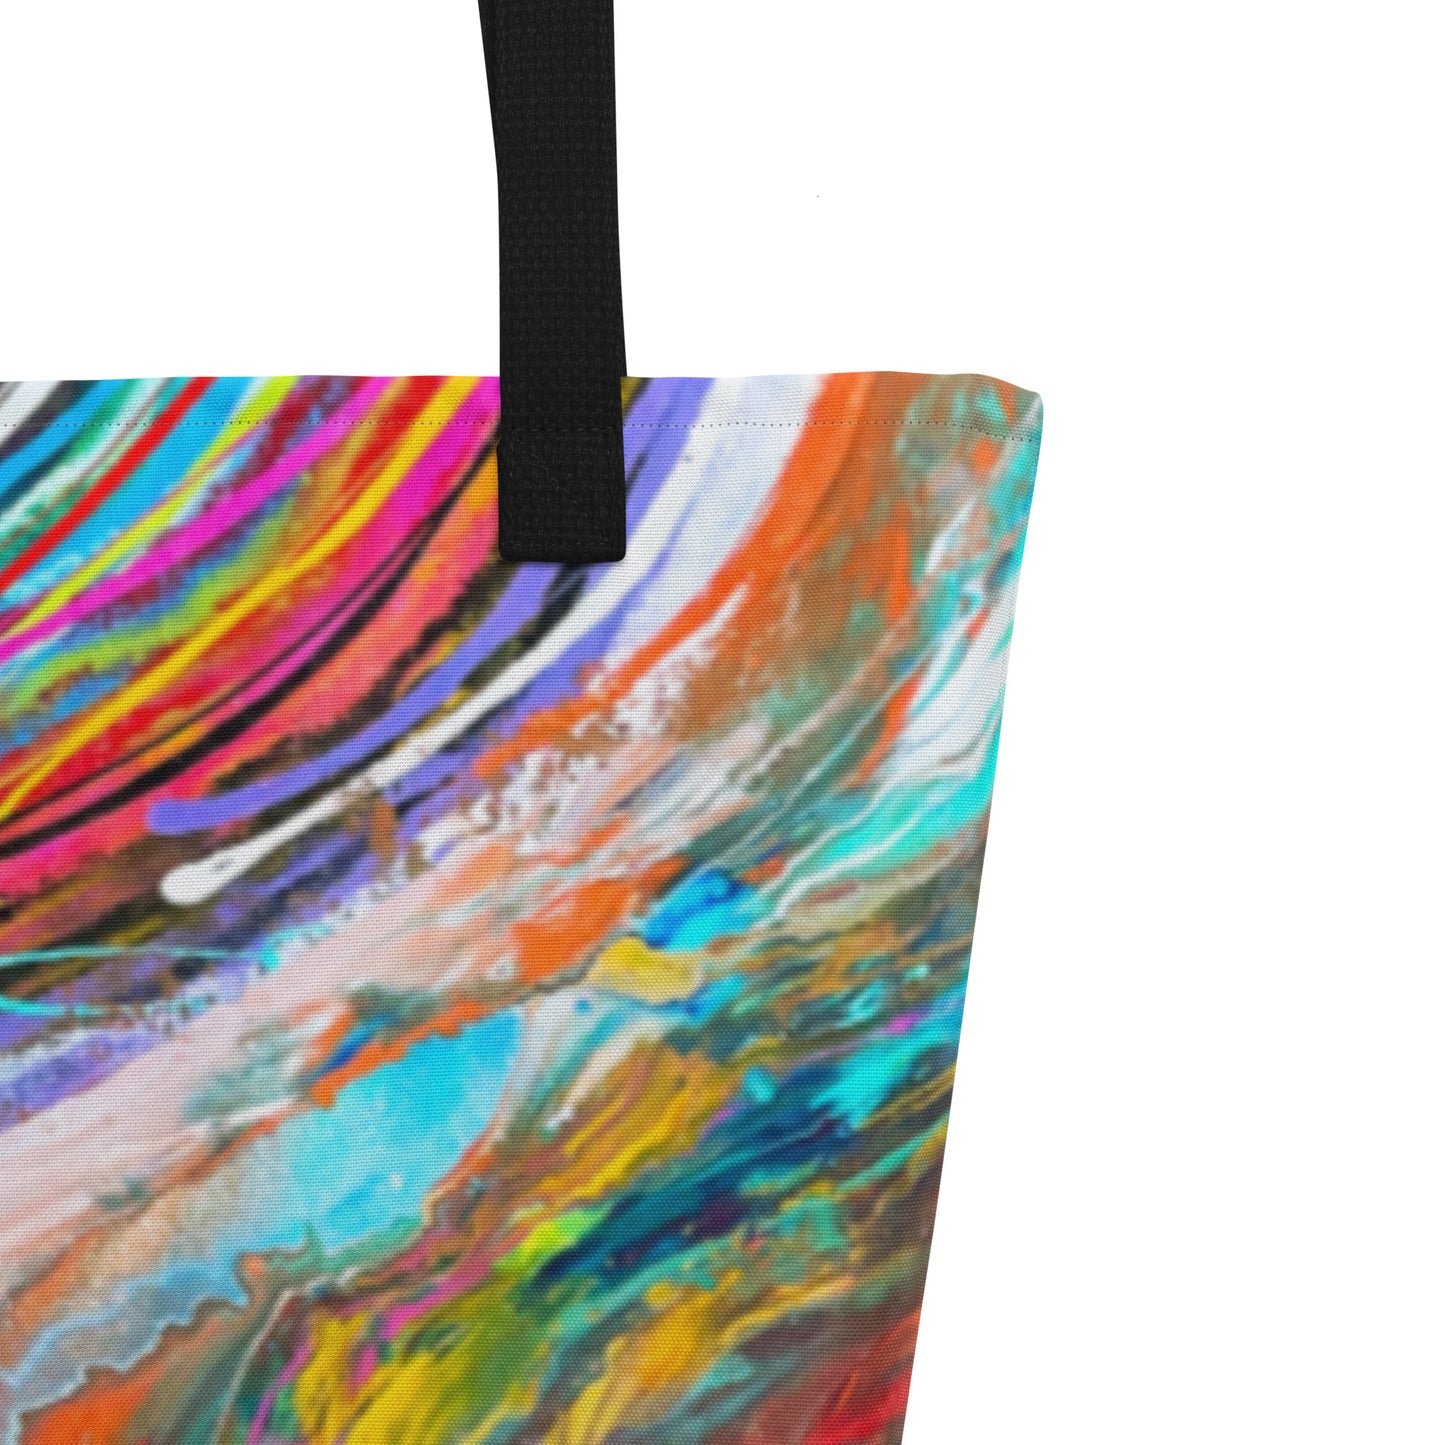 All-Over Print Large Tote Bag - Rainbow Wave design